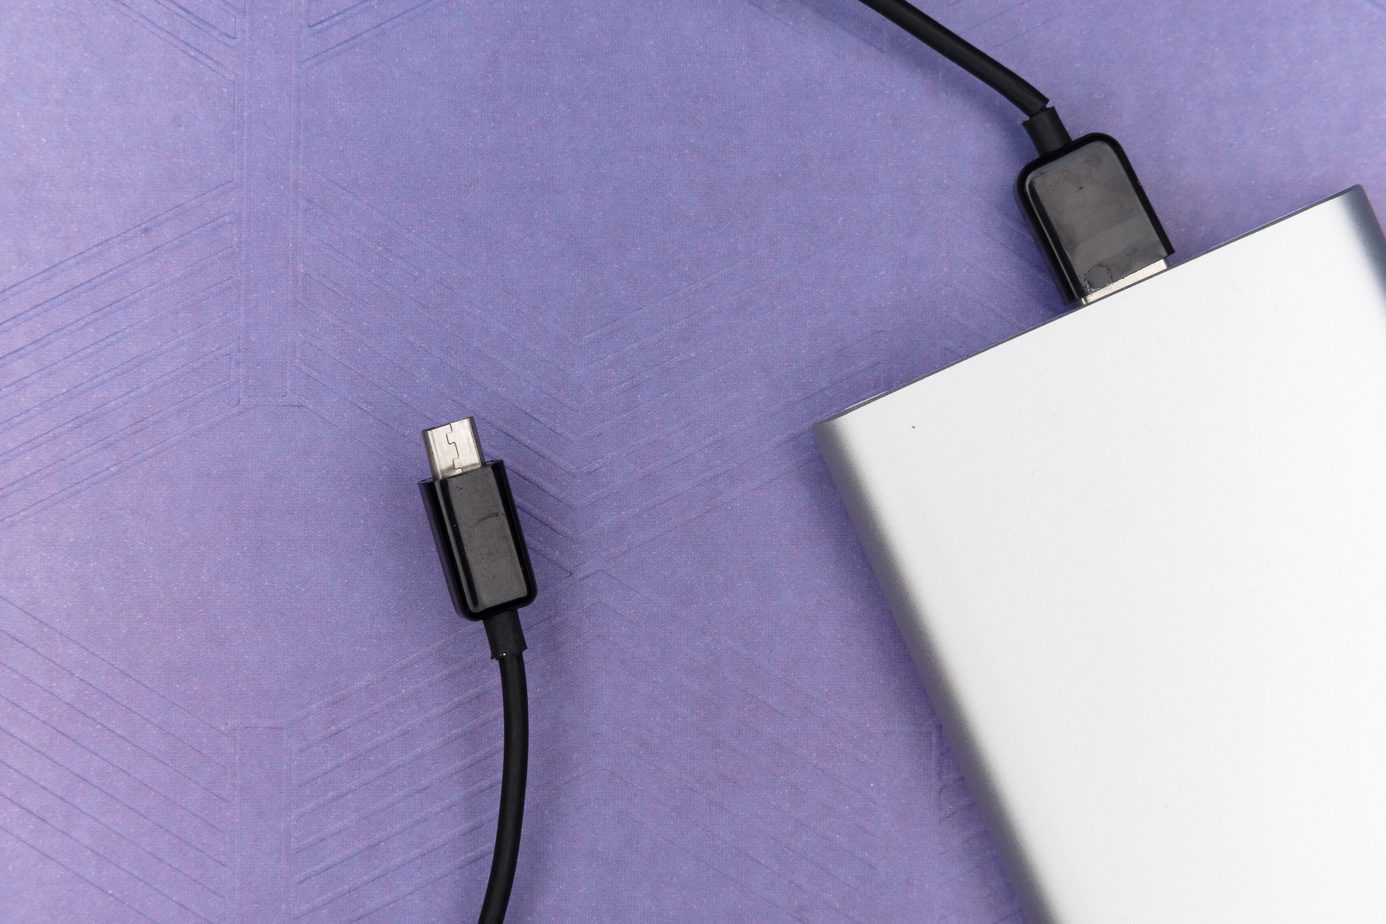 Is it worth buying a powerbank?